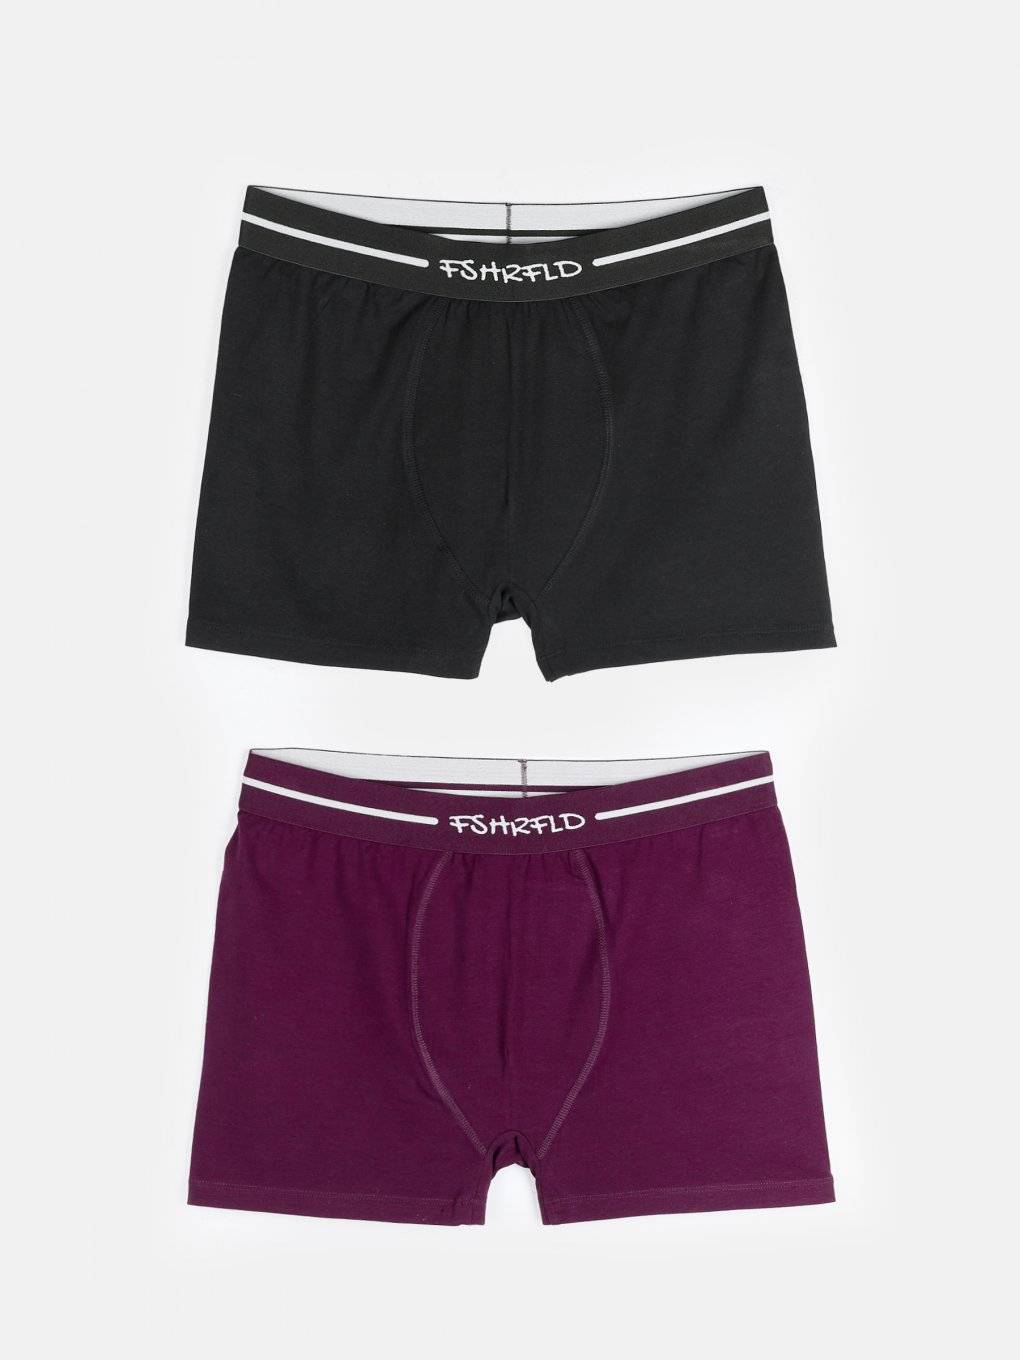 2 pack of basic boxers